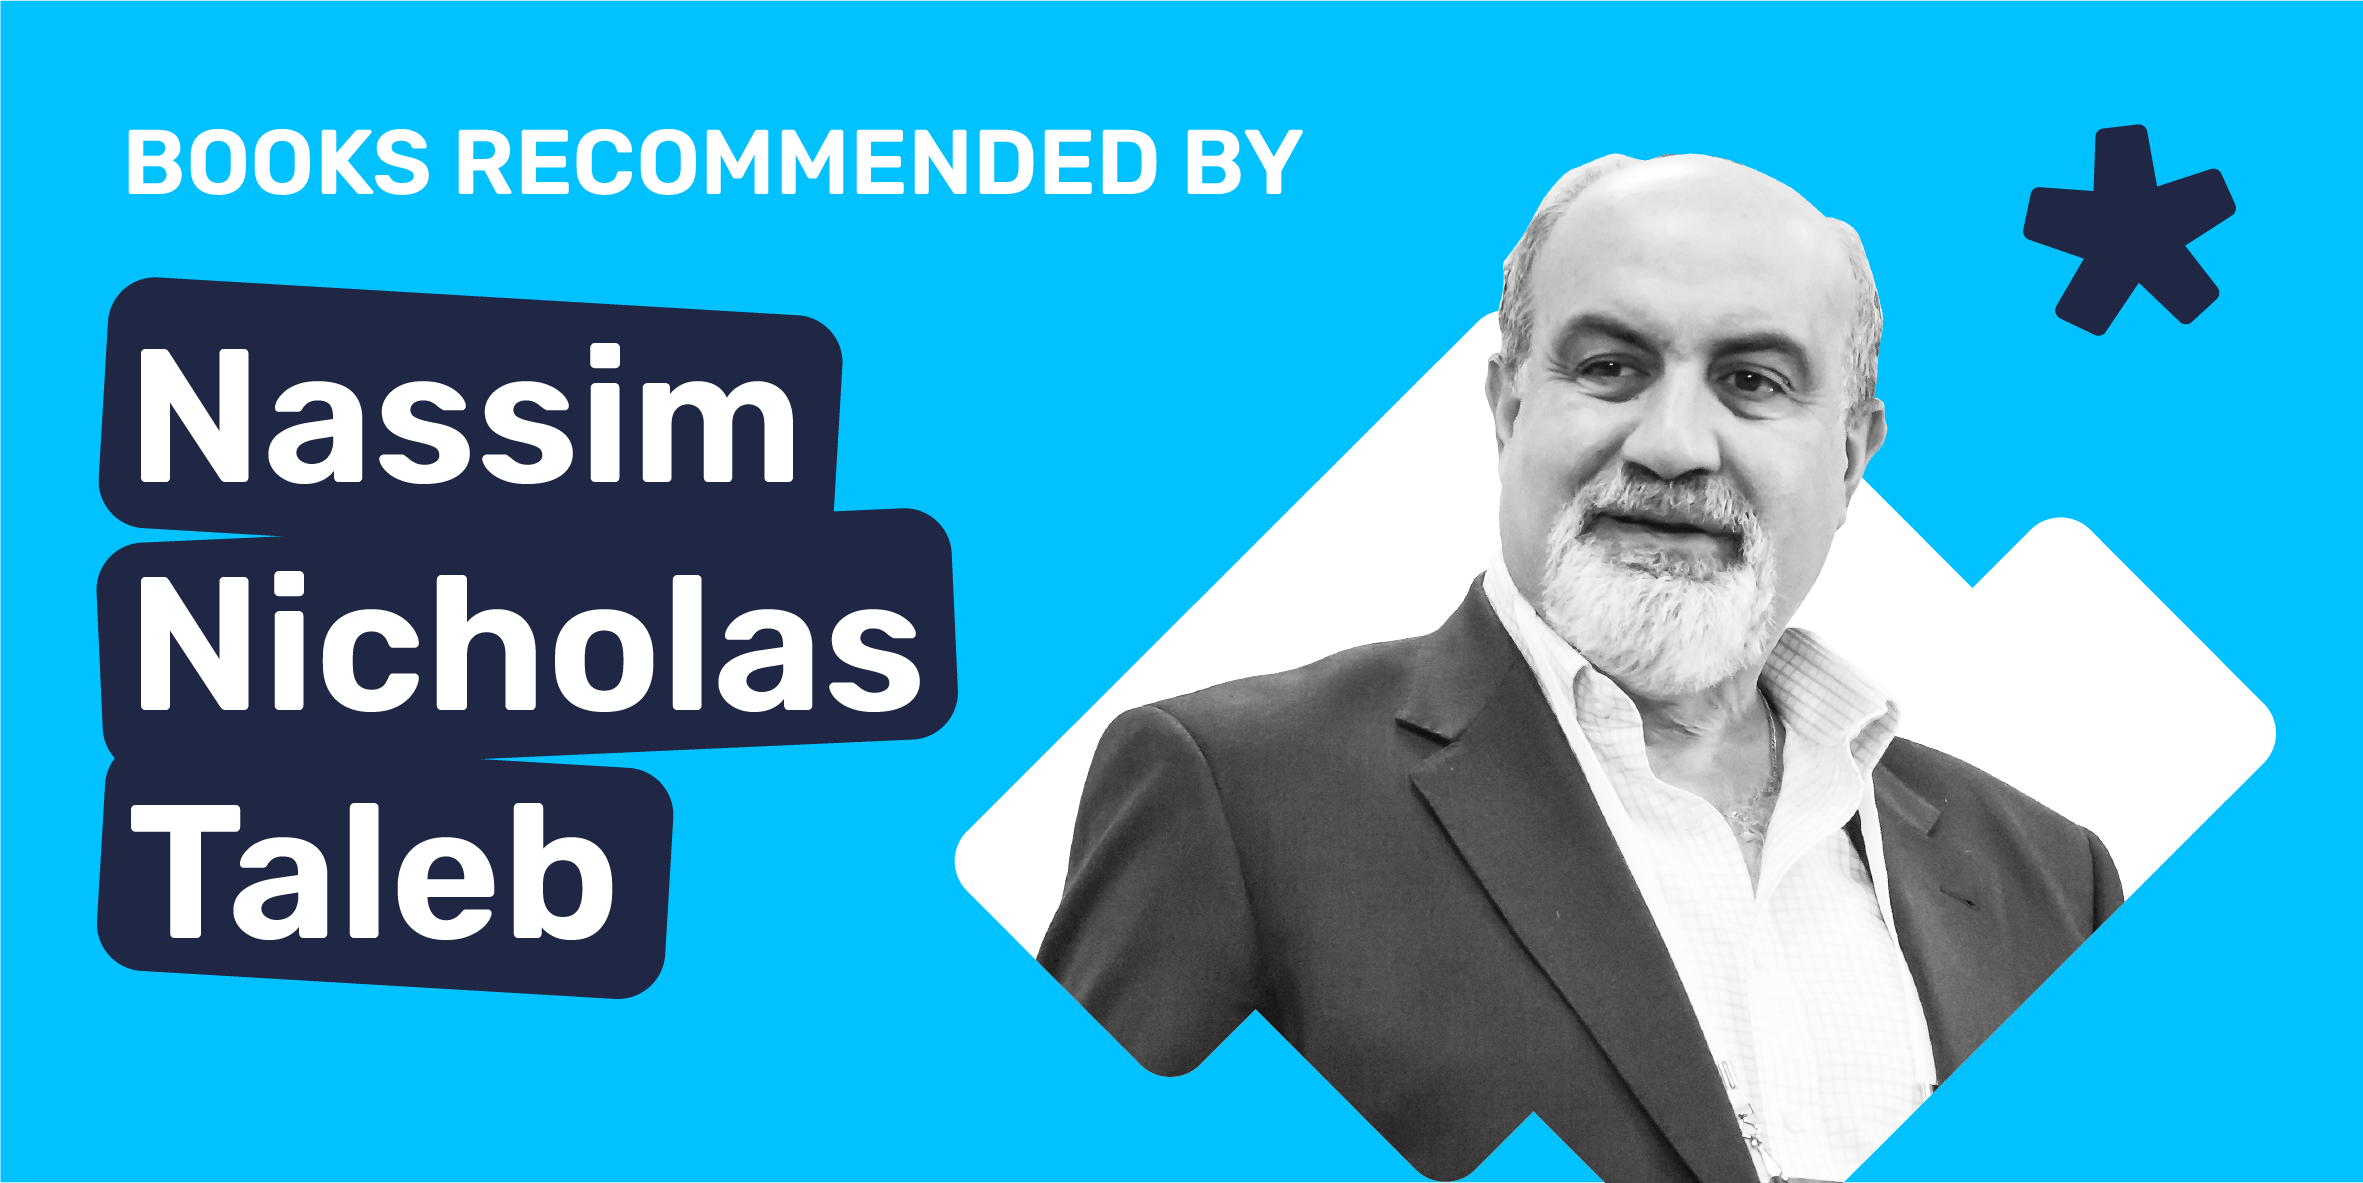 Uptime | Blog | Books Recommended by Nassim Nicholas Taleb